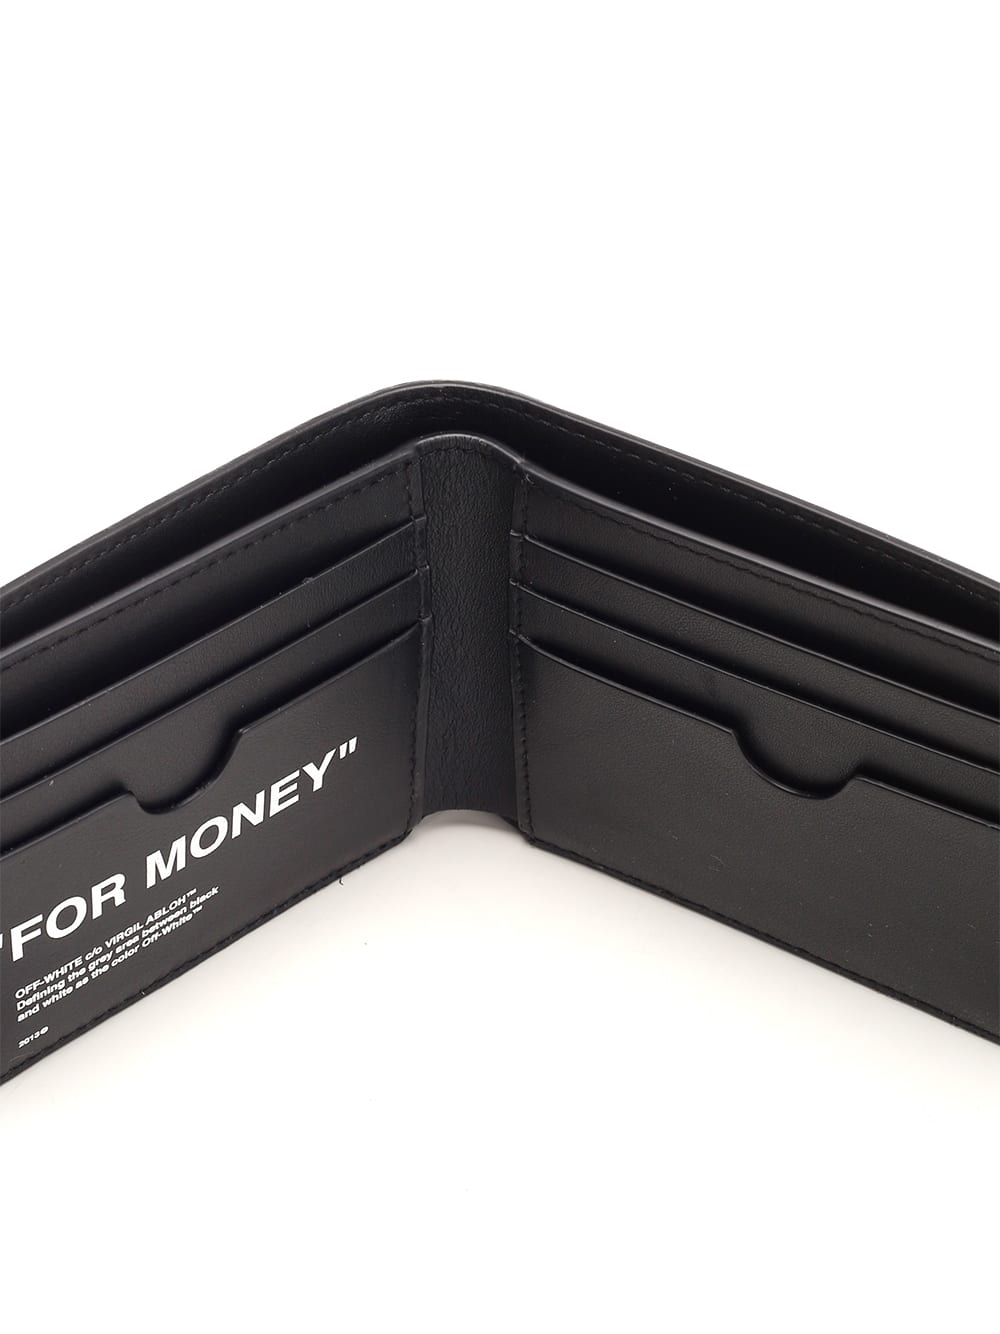 Off-White c/o Virgil Abloh Quote Bookish Bifold Wallet in Black